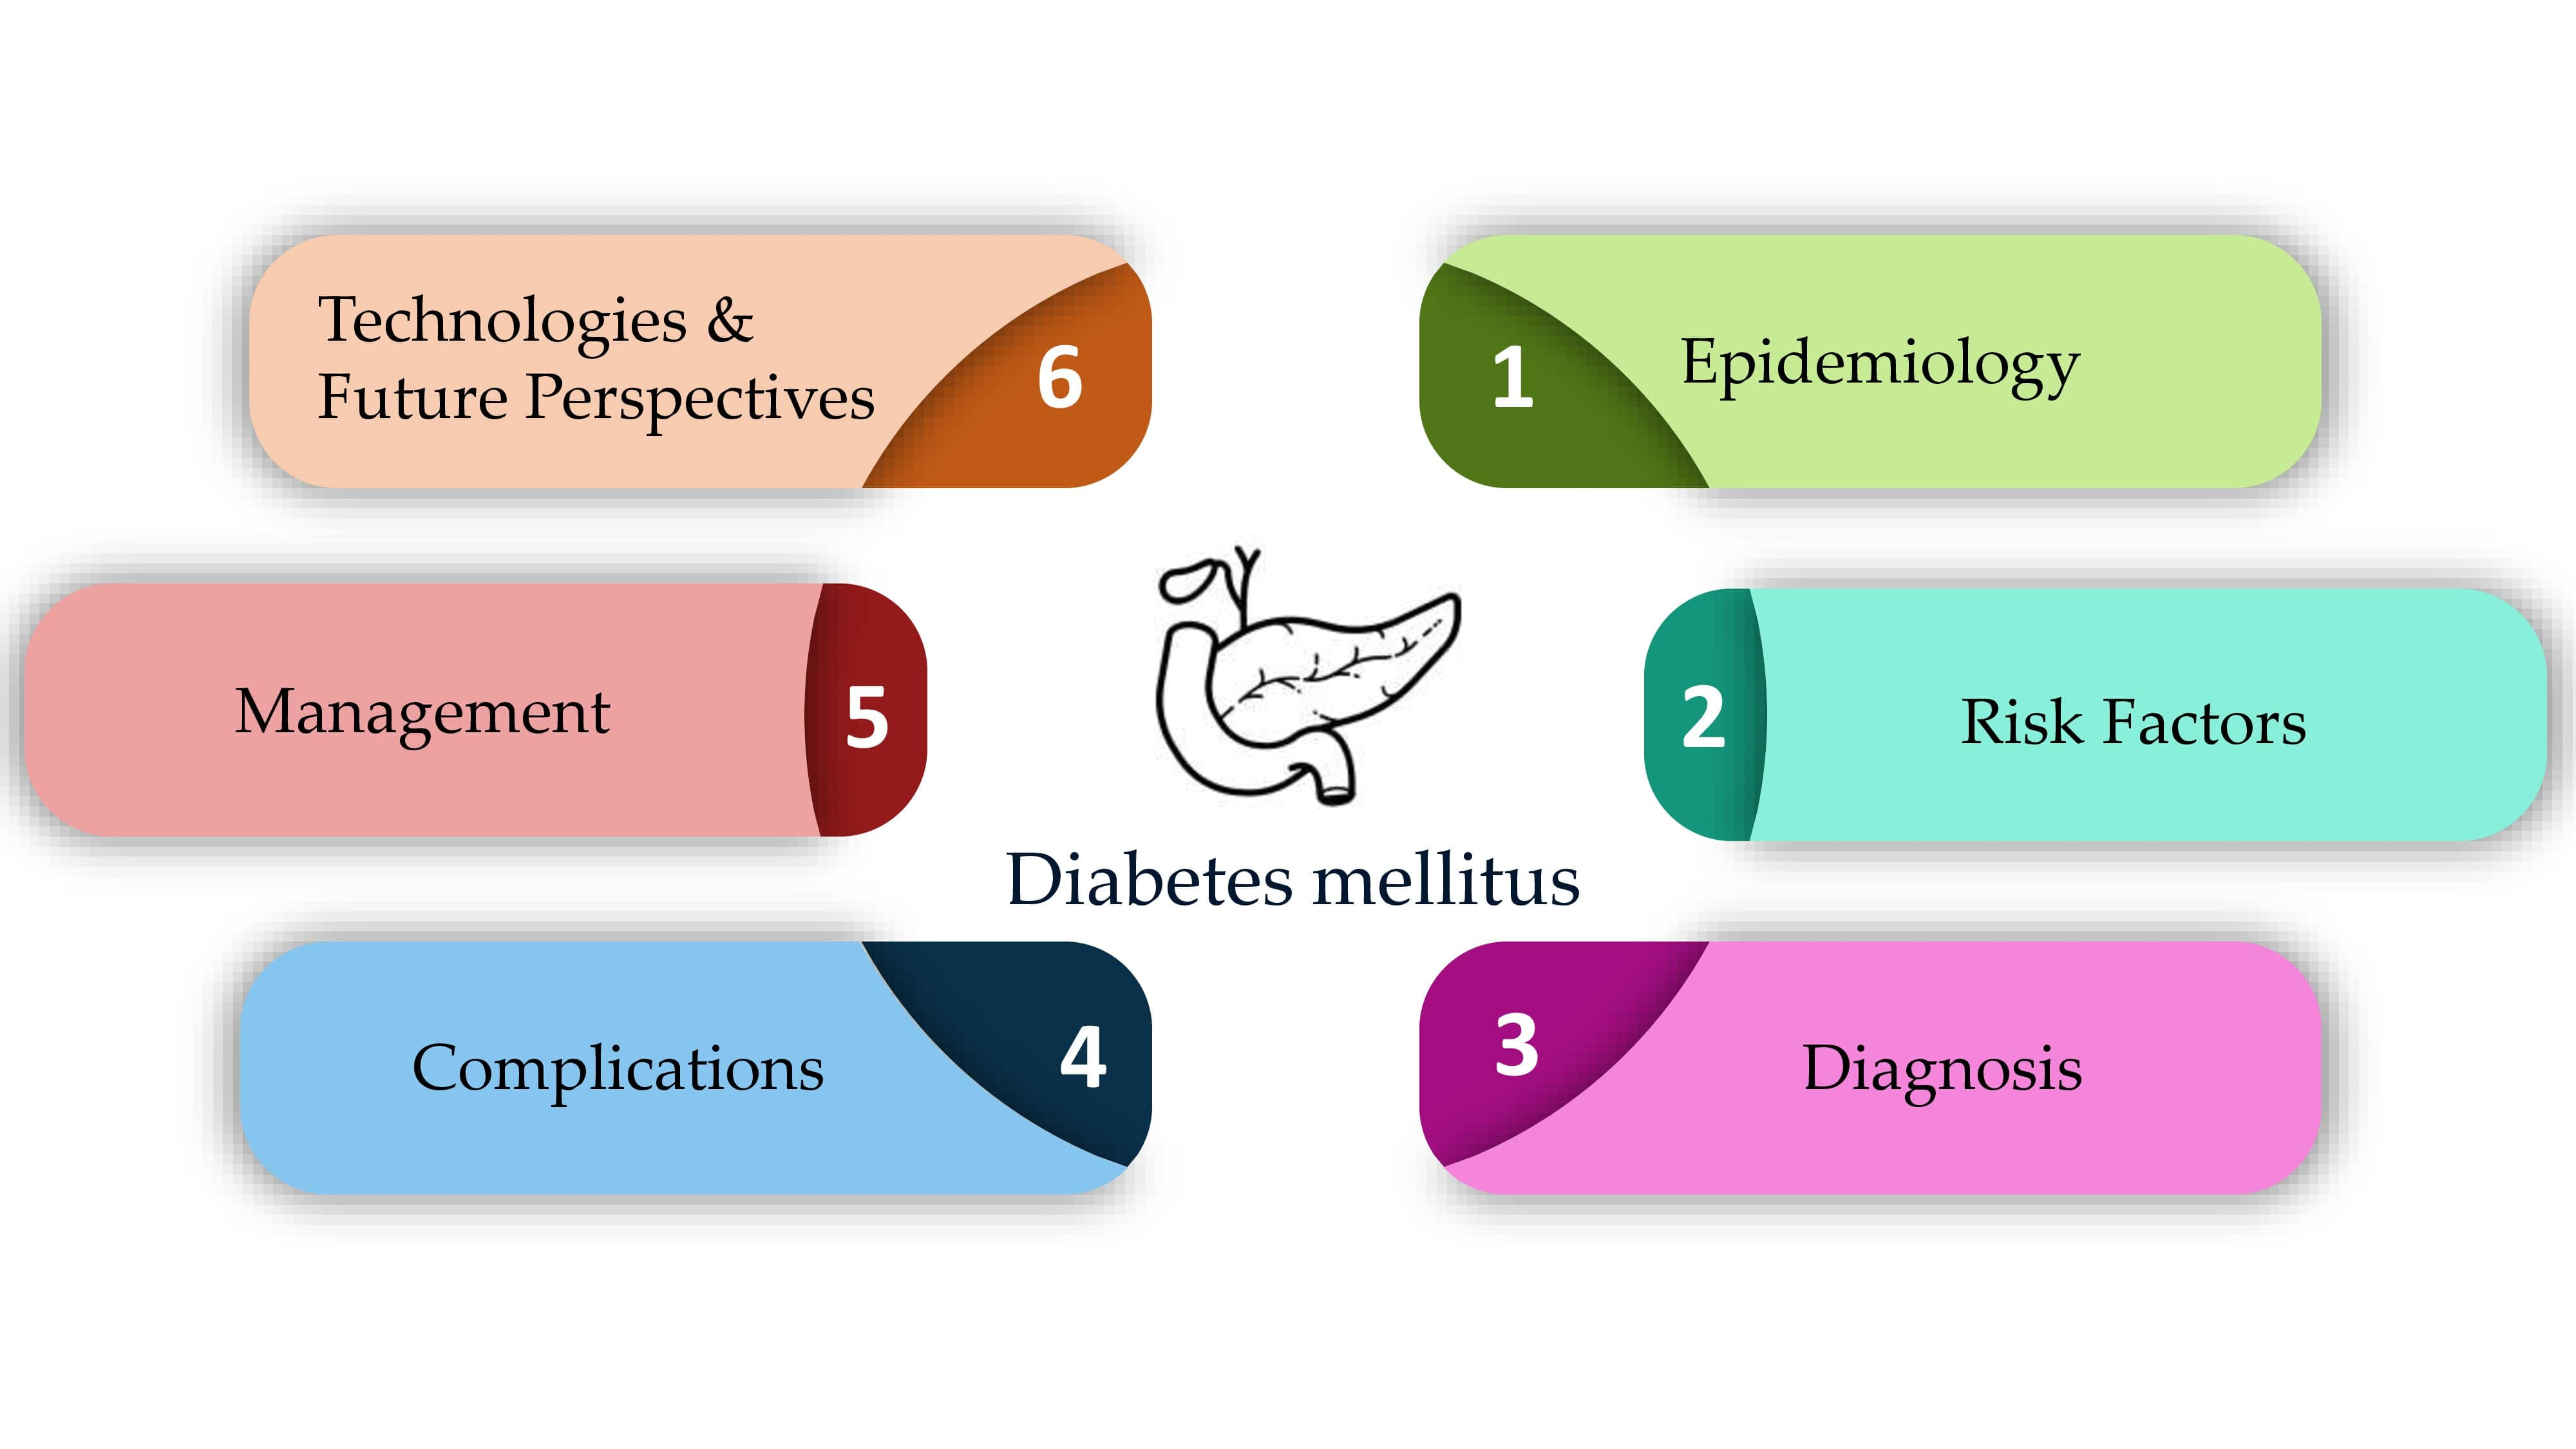 research on type 1 diabetic